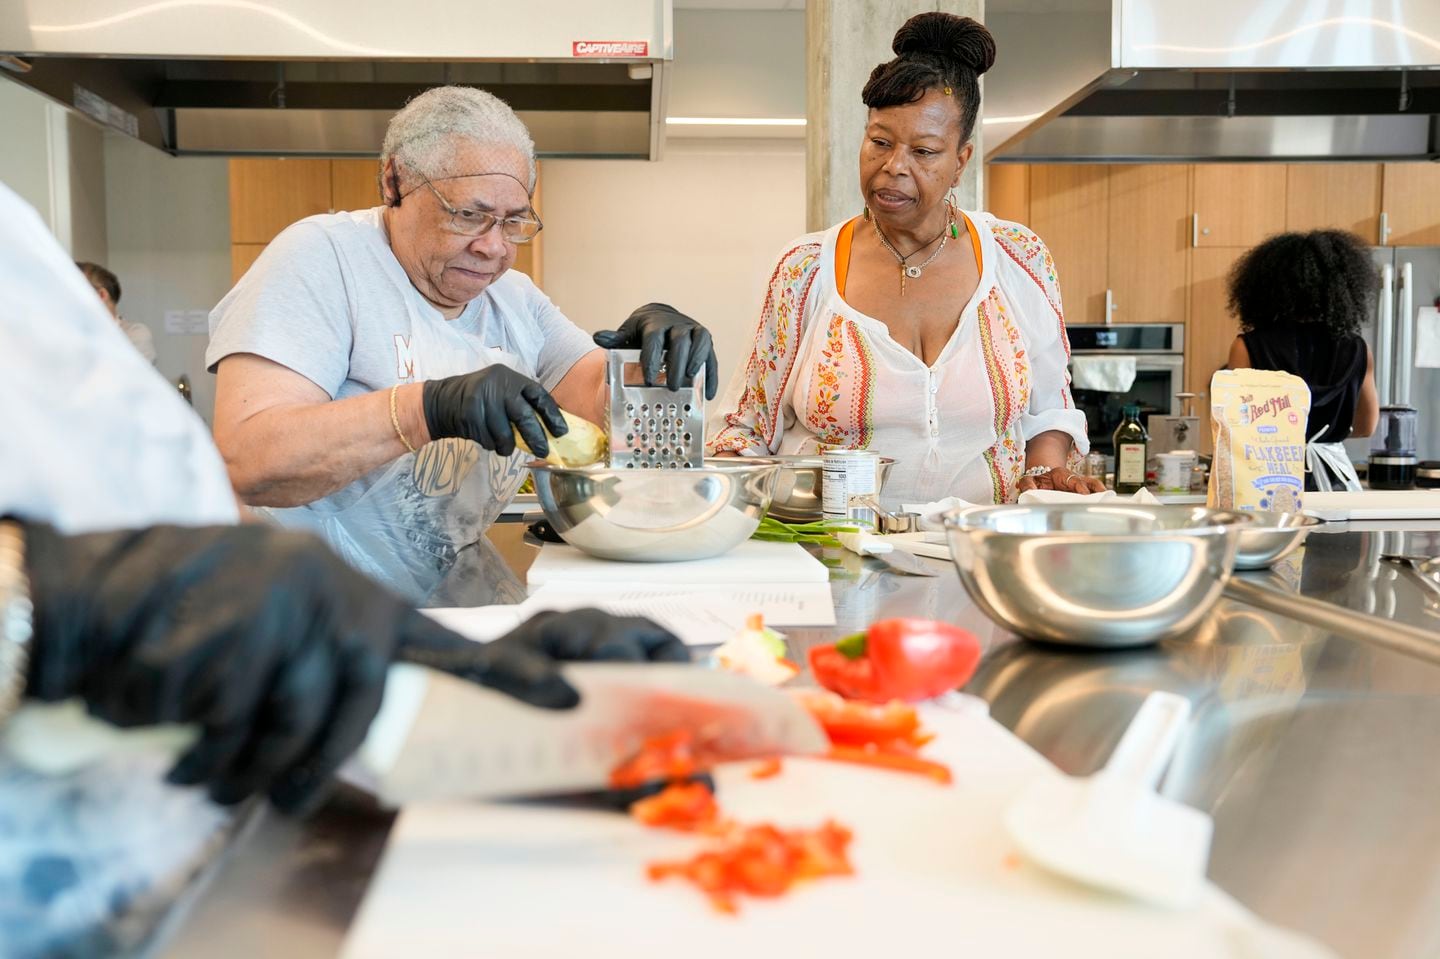 Glorya Fernandez (right) taught Wynne Blair how to cook black-eyed pea fritters during the Juneteenth celebration in Boston. Fernandez is a local chef that hosts plant-based meal cooking demonstrations and other nutritional instruction initiatives through her company gogobytes.